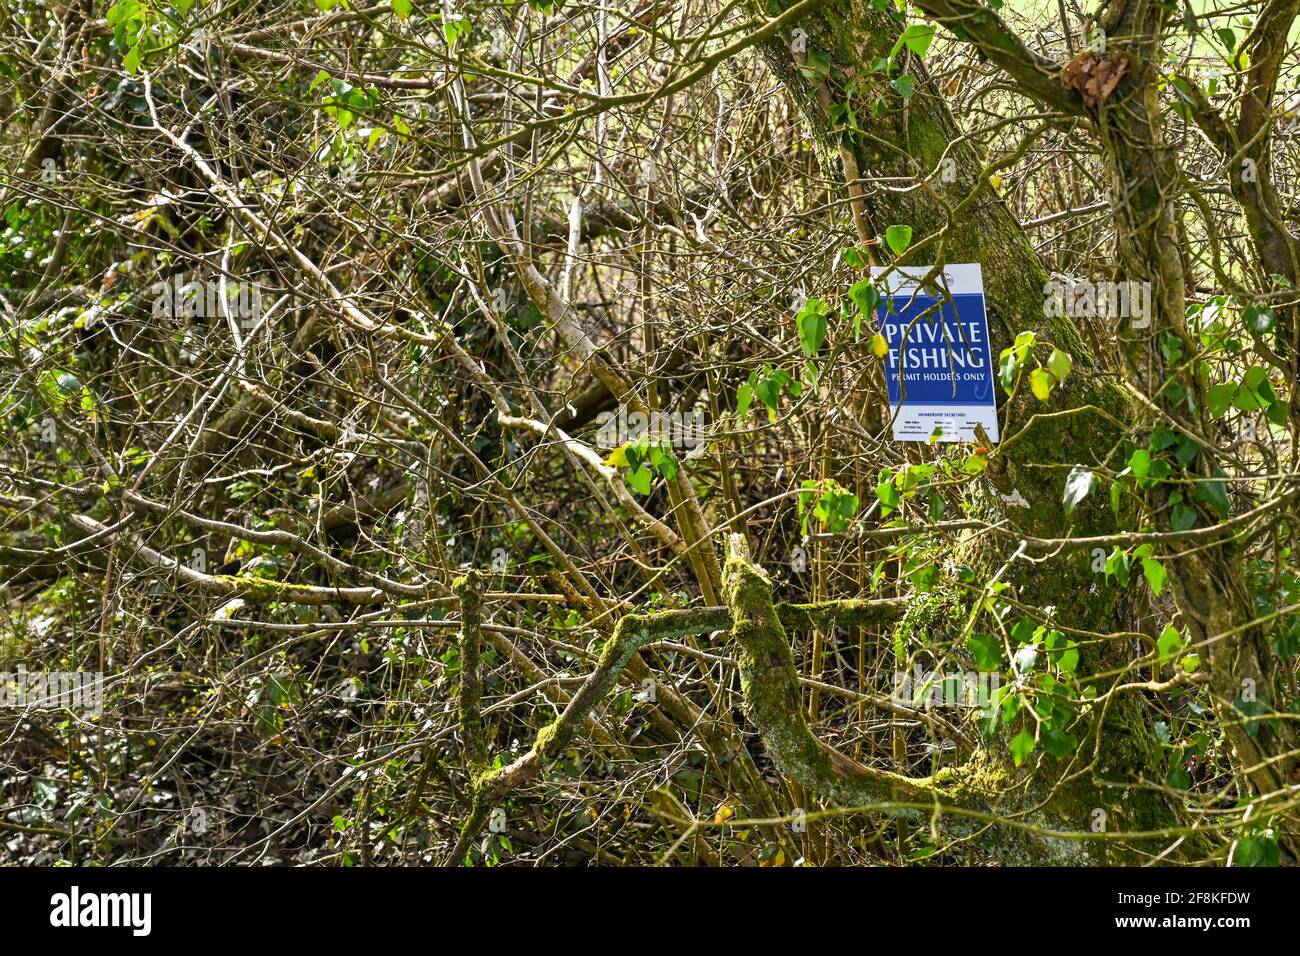 Cardiff, Wales - March 2021: Private fishing sign attached to a tree above a small river in the countryside Stock Photo